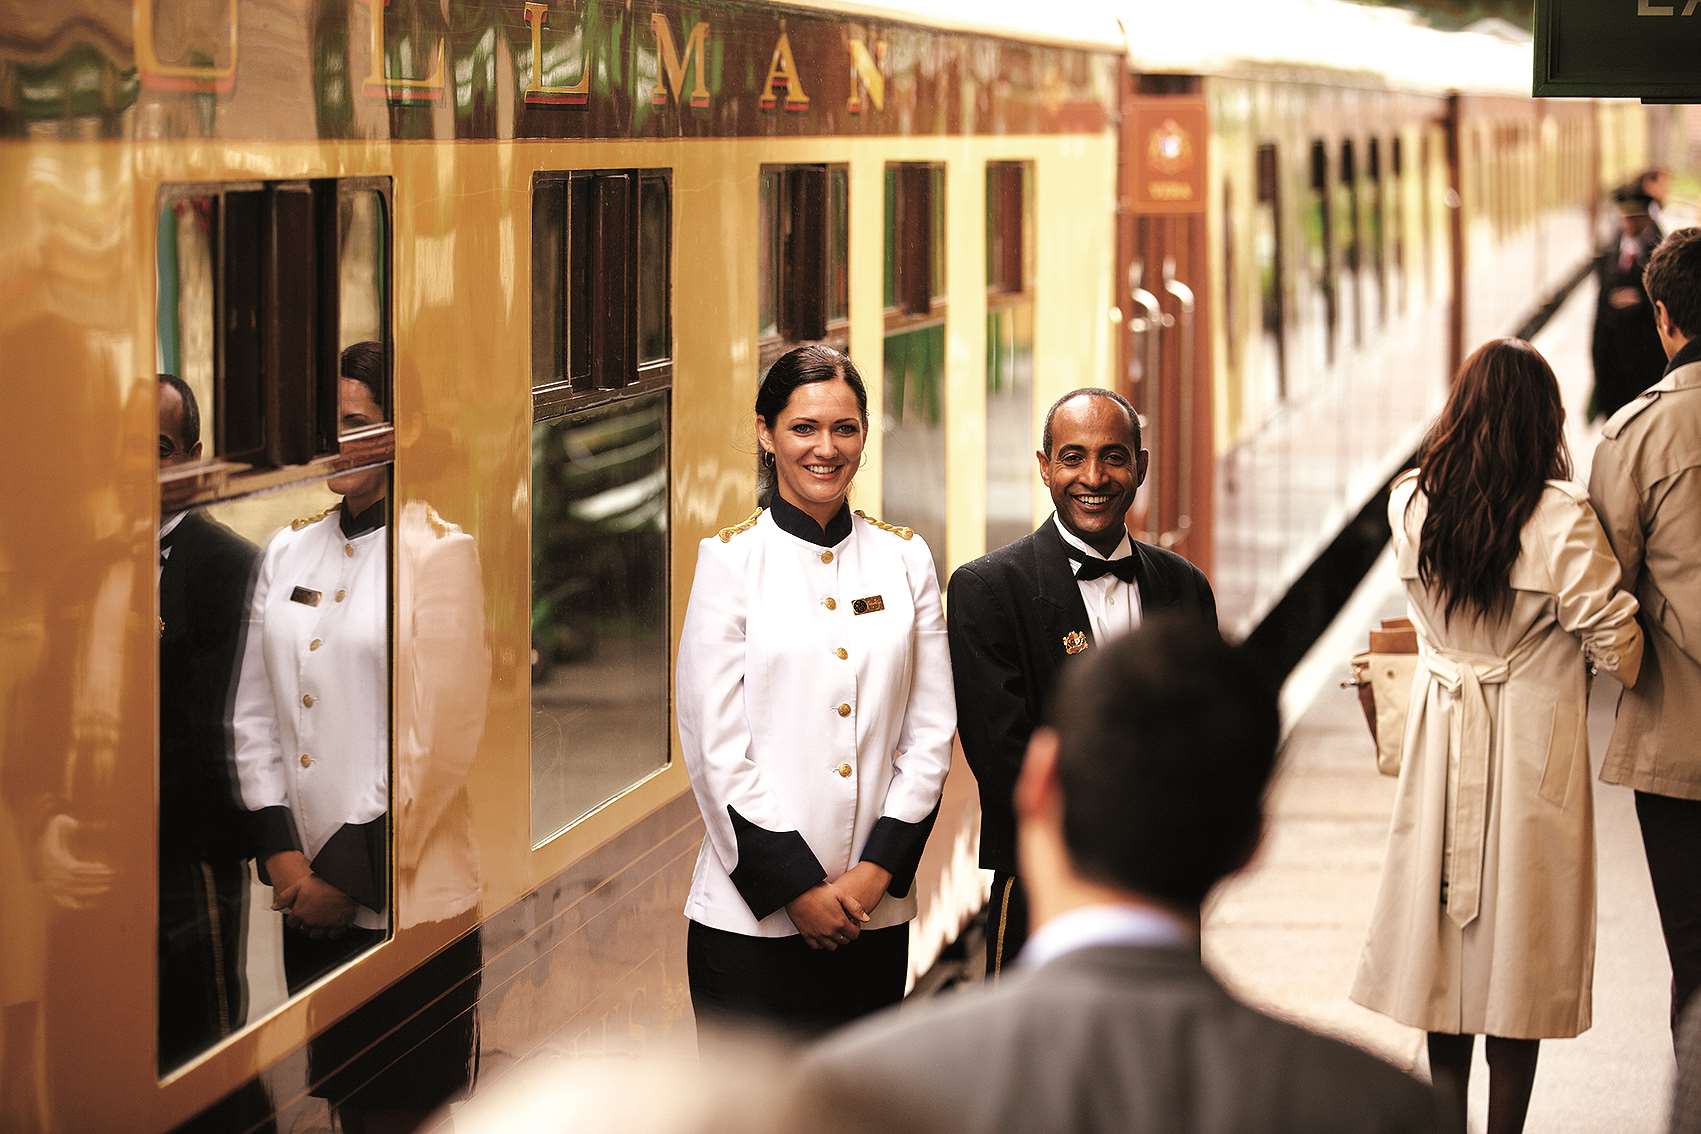 Staff will make you feel special on board